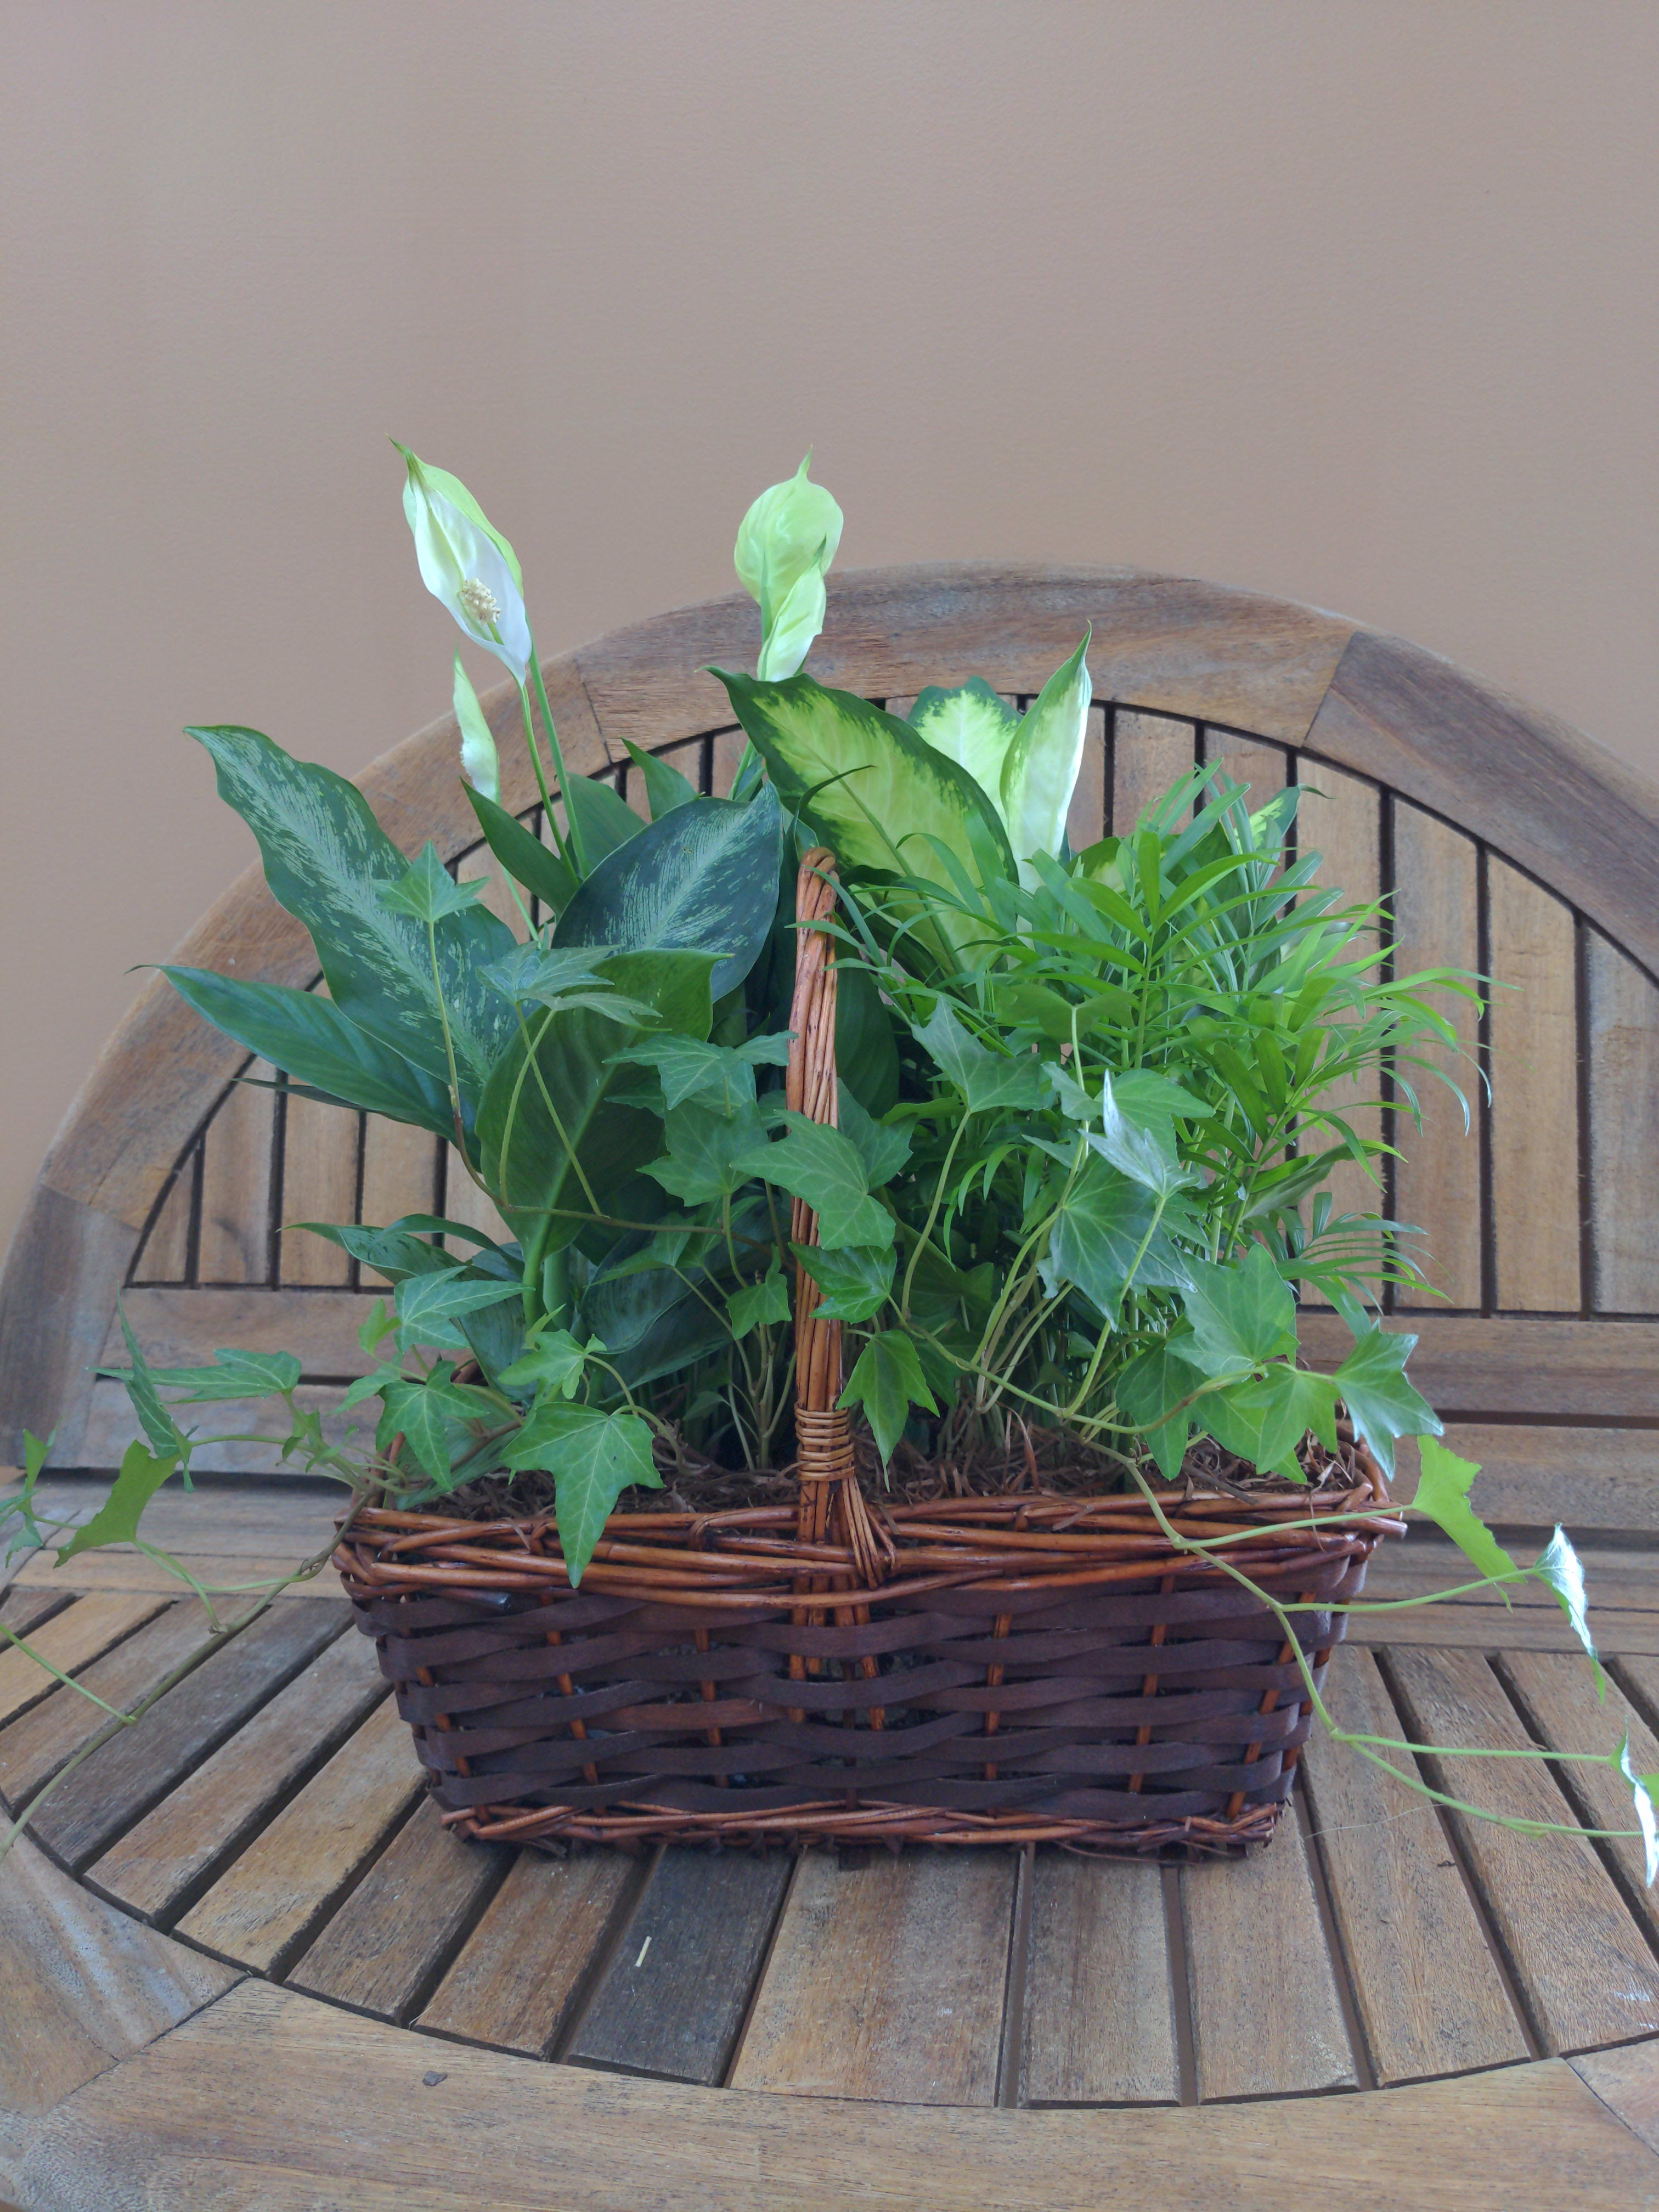 DG75 Basket Dish Garden  - Dish Garden Size Medium Container color &amp; design &amp; Plants May Be Different Then Shown But Size Will Be the Same.